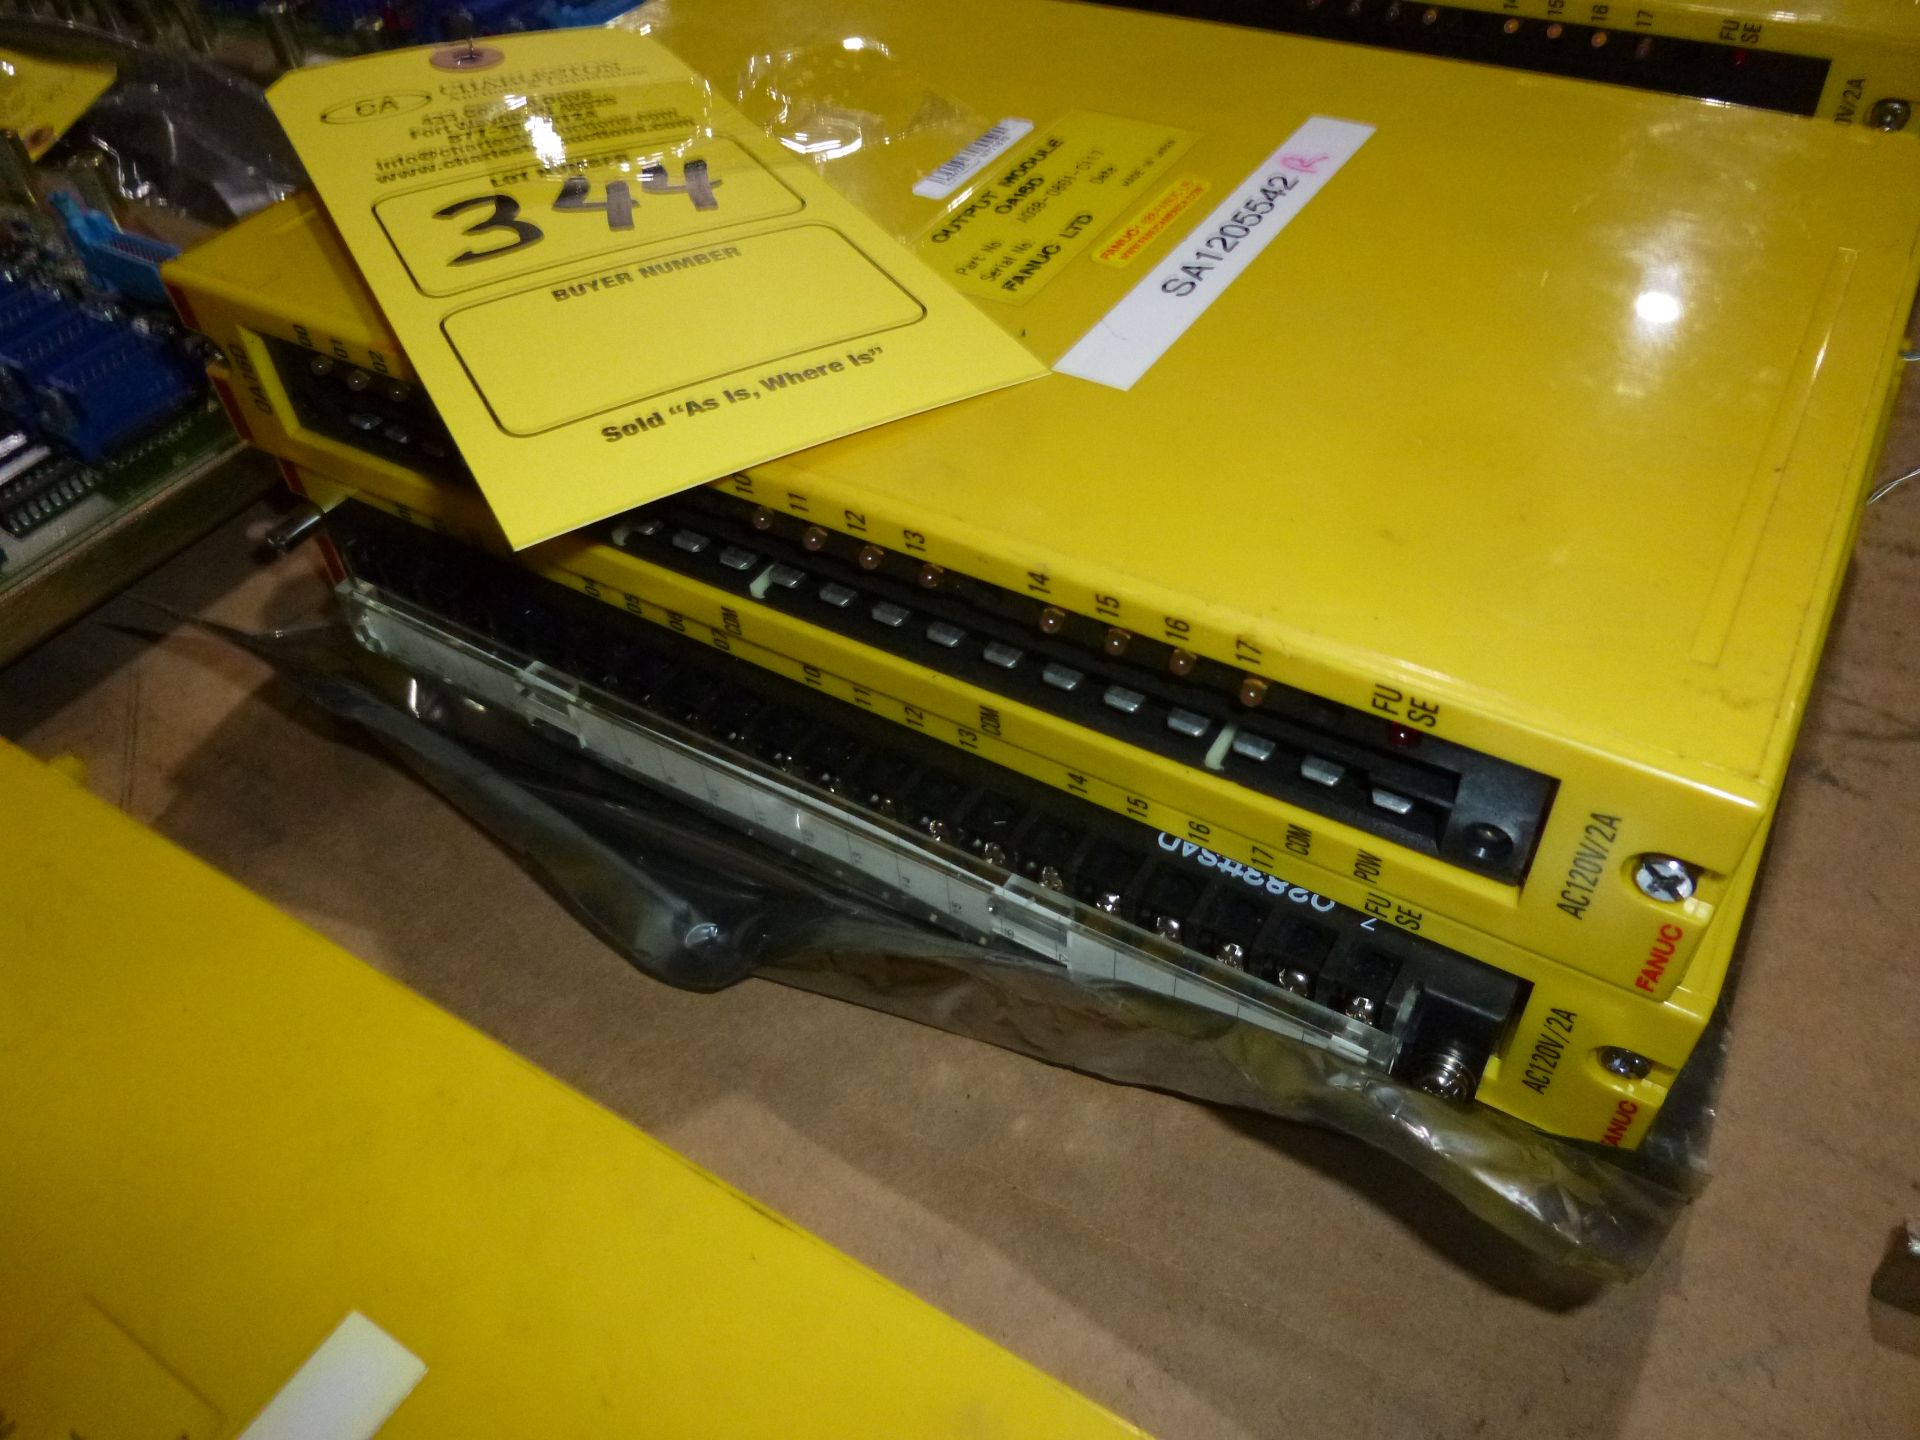 Qty 2 Fanuc output module model A03B-0801-C117, as always with Brolyn LLC auctions, all lots can - Image 2 of 3